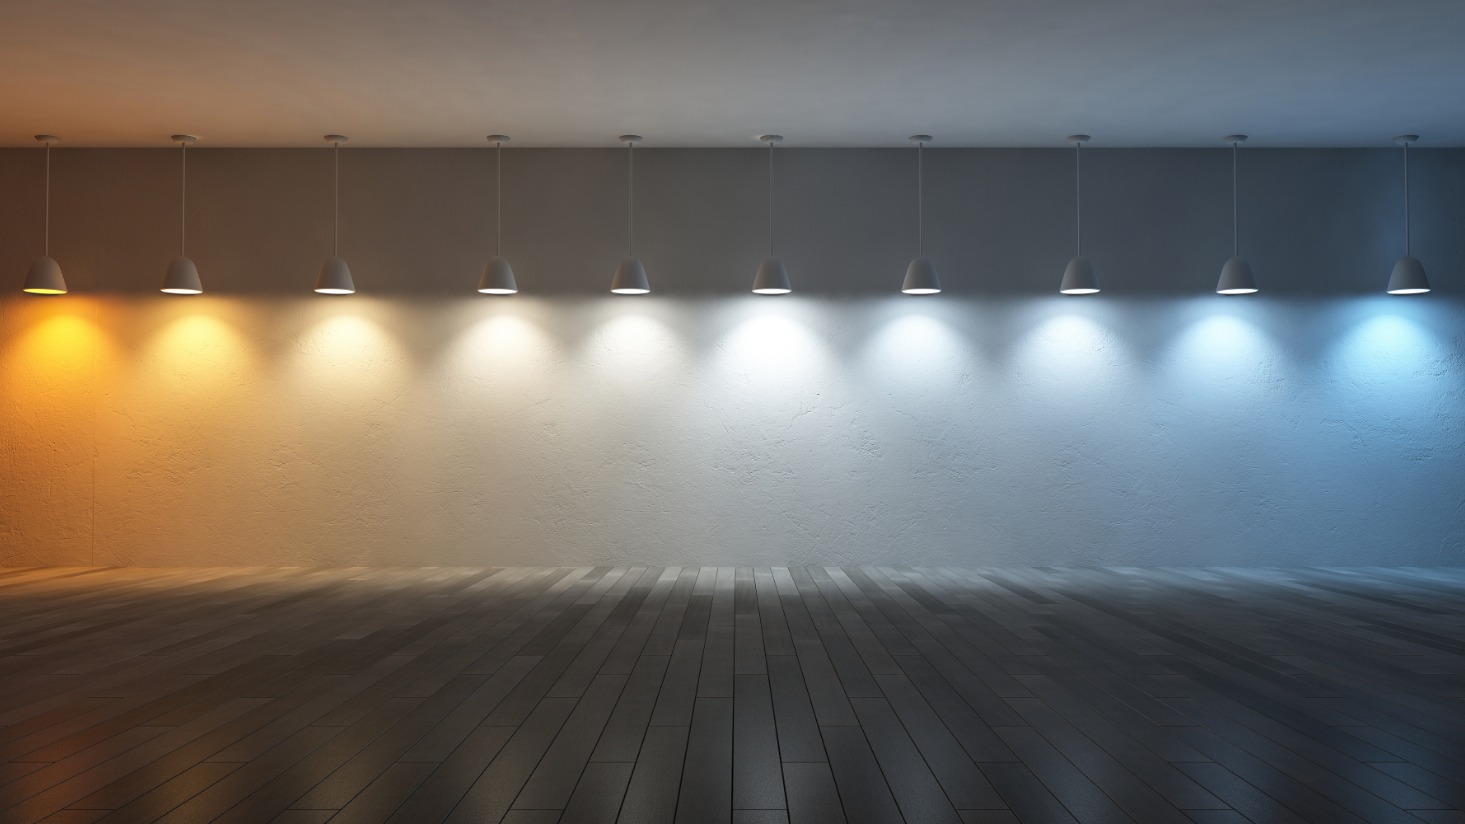 The Pros and Cons of LED Lights